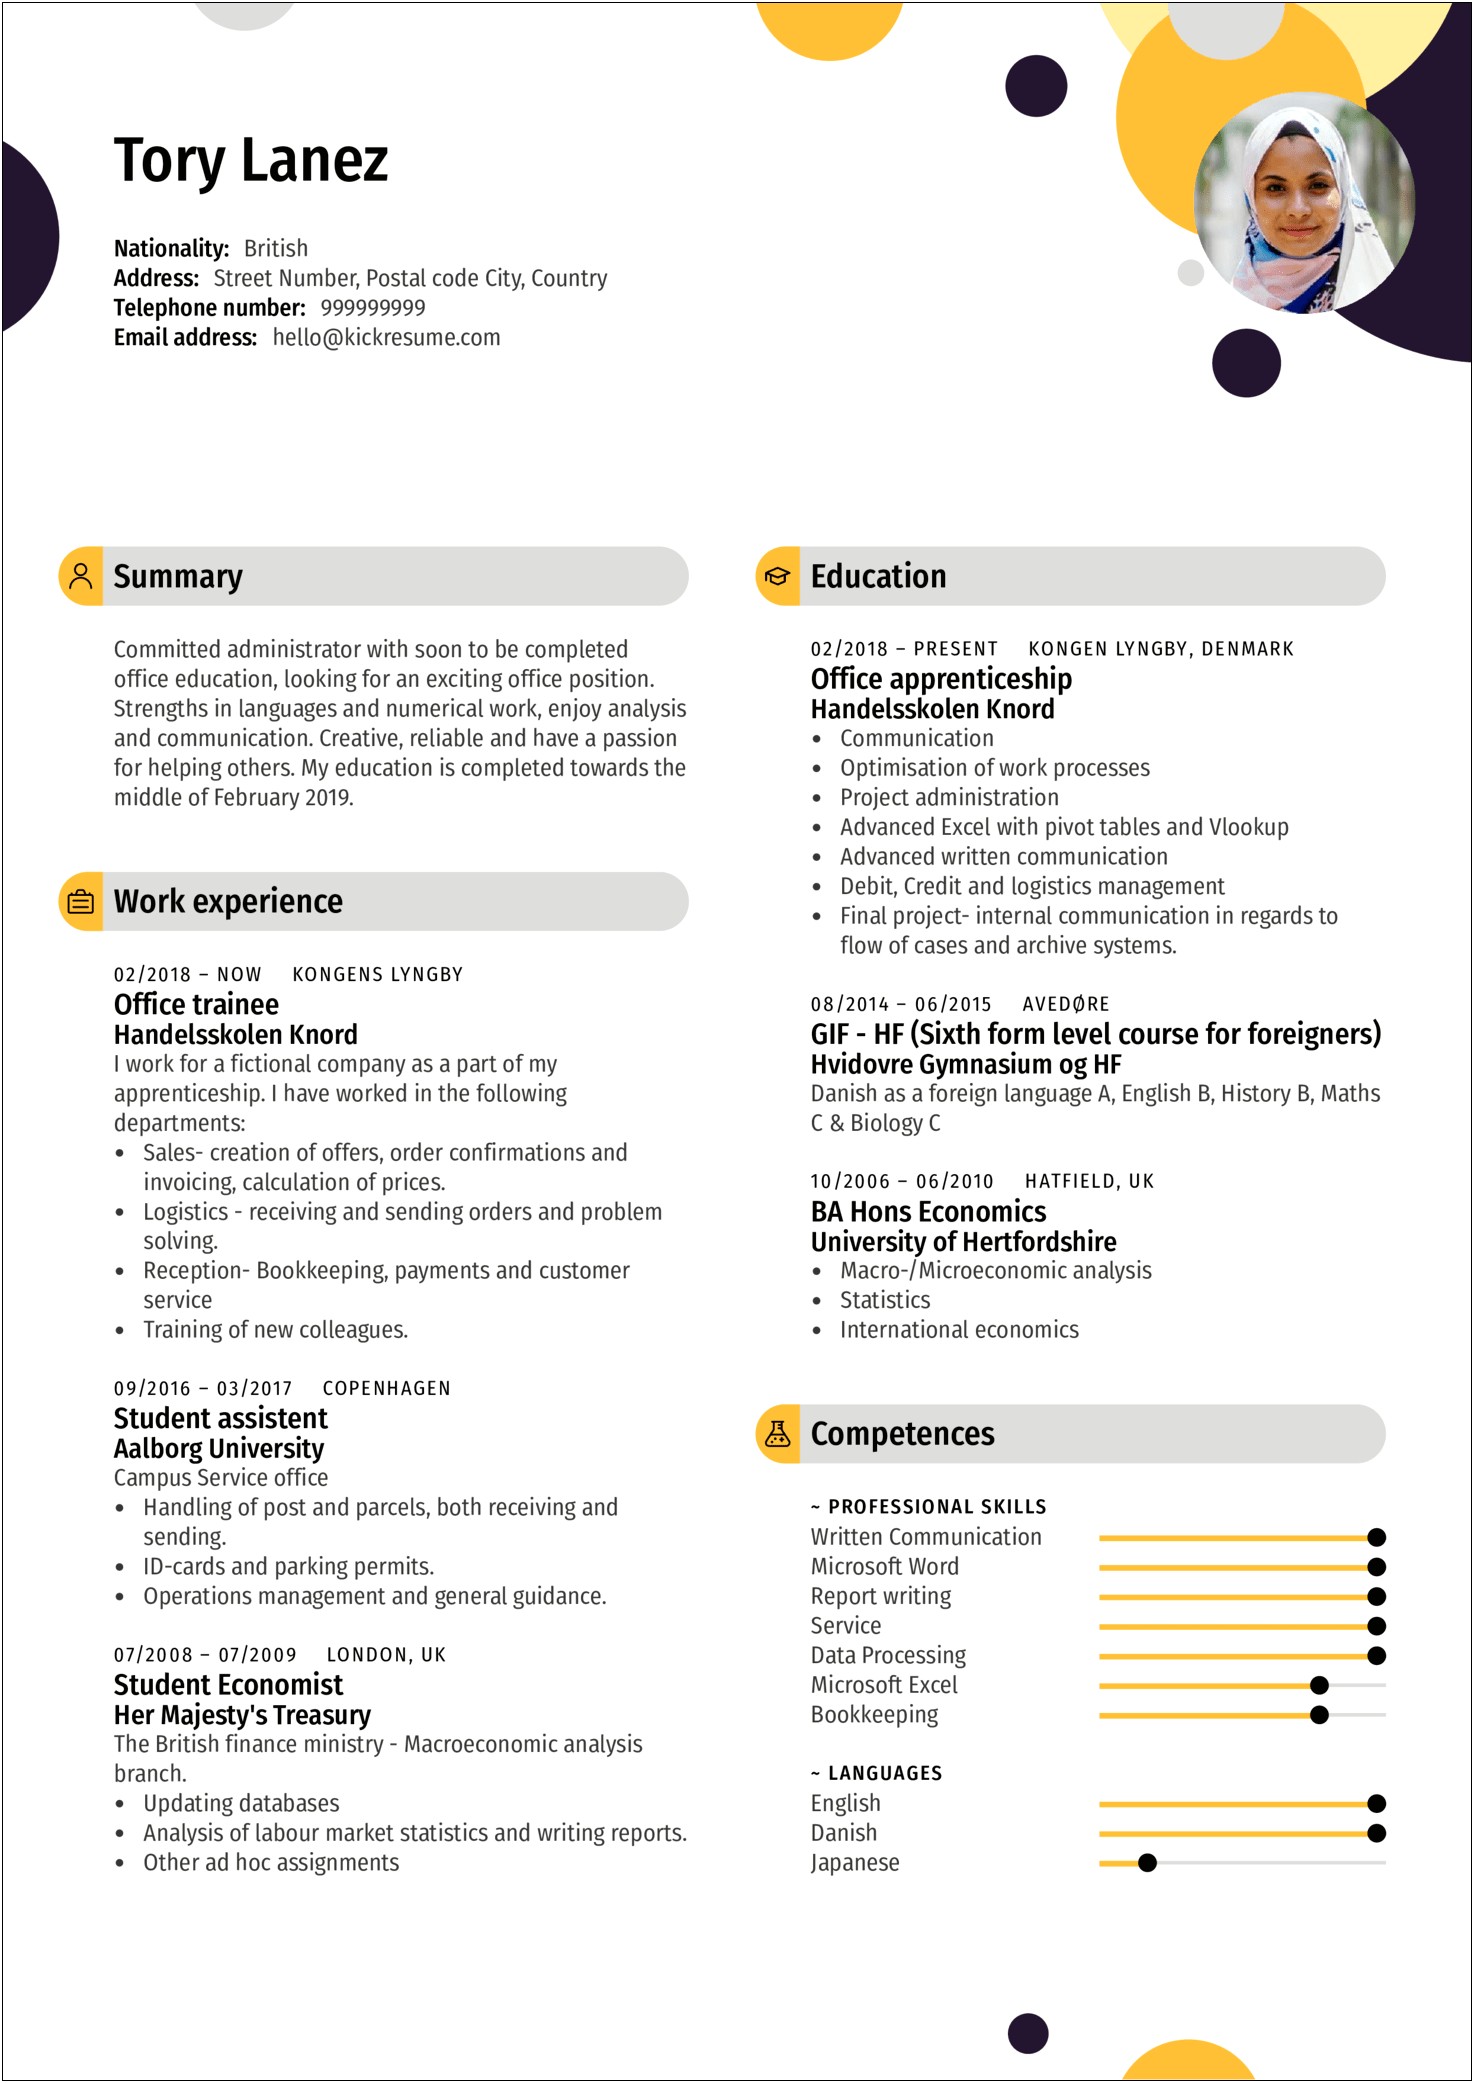 Resume Helped Internal Clients With Work